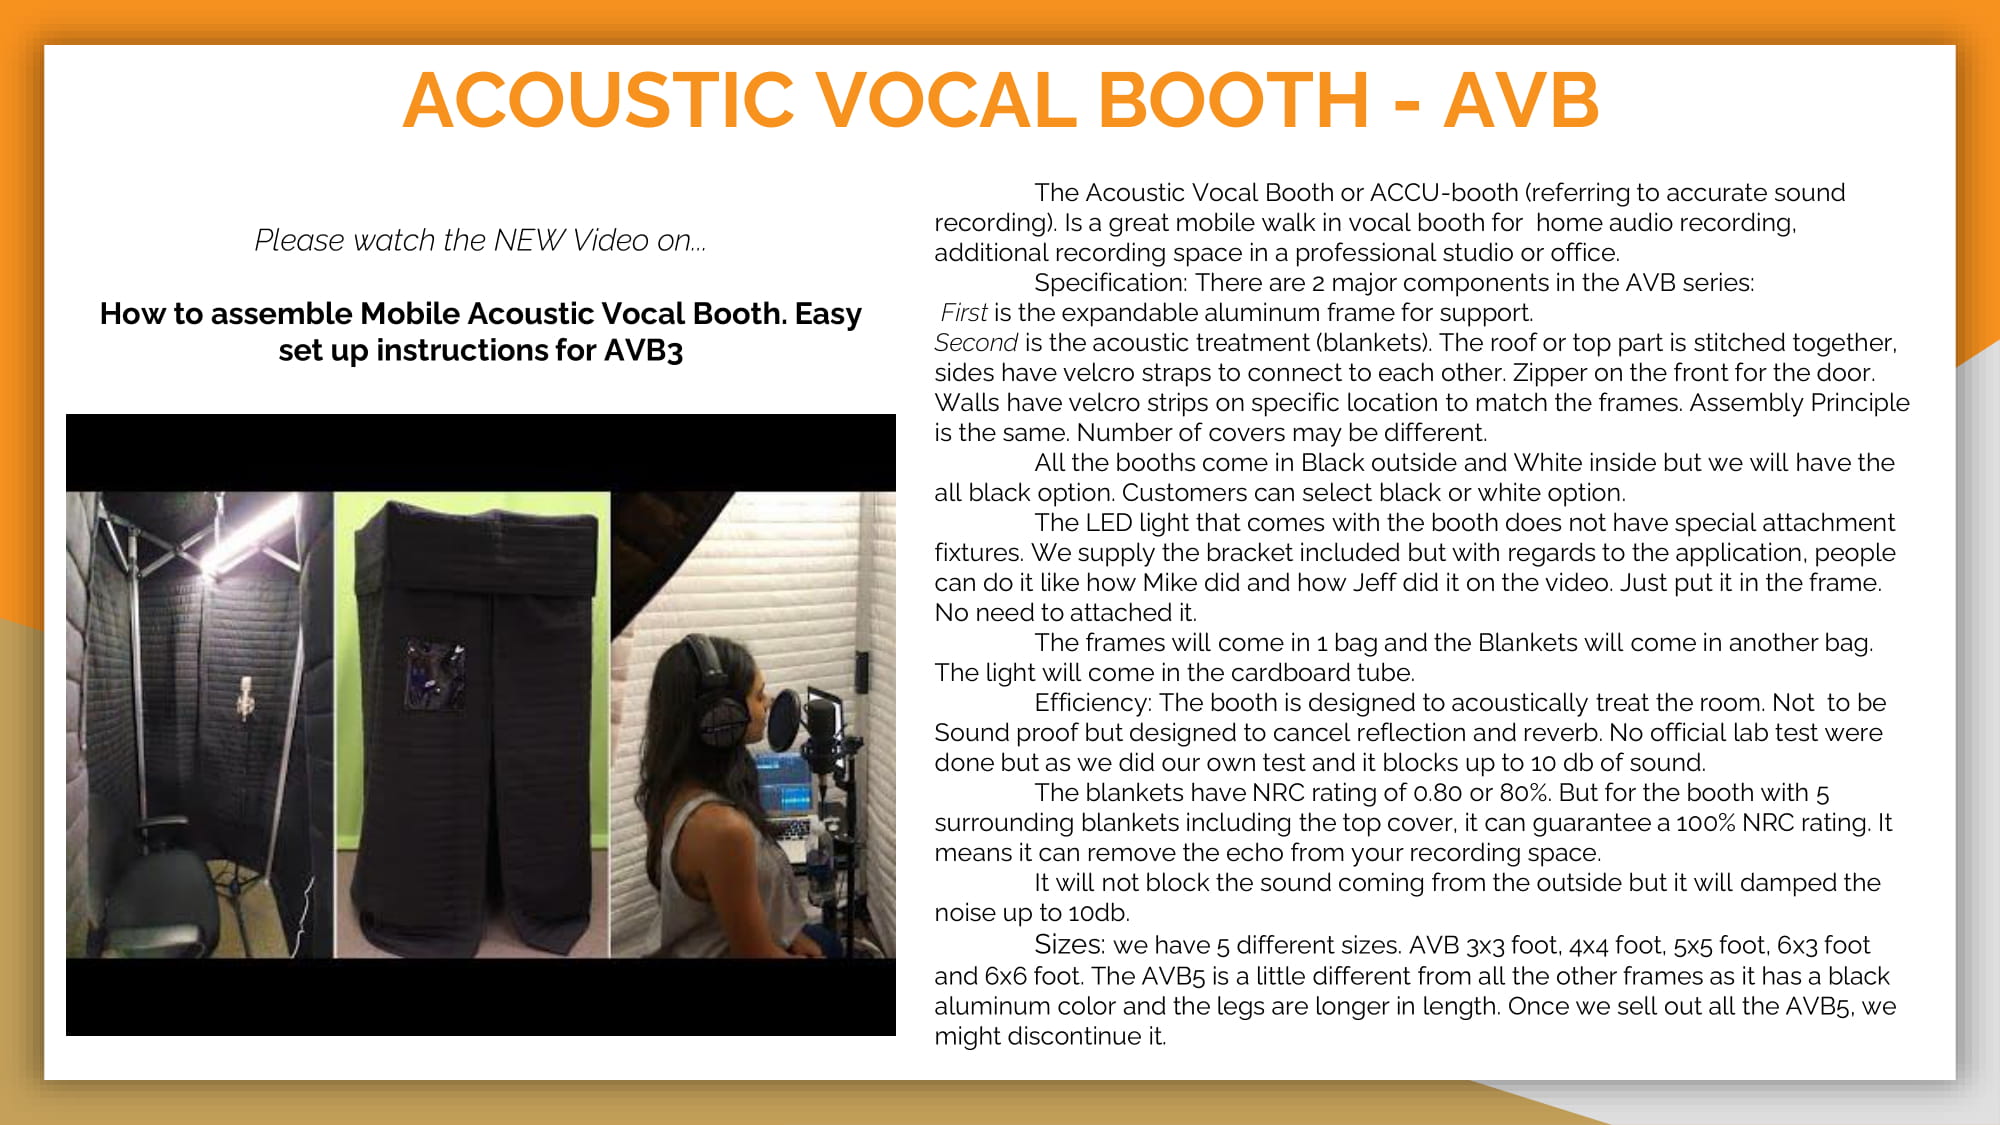 ACOUSTIC VOCAL BOOTH - AVB